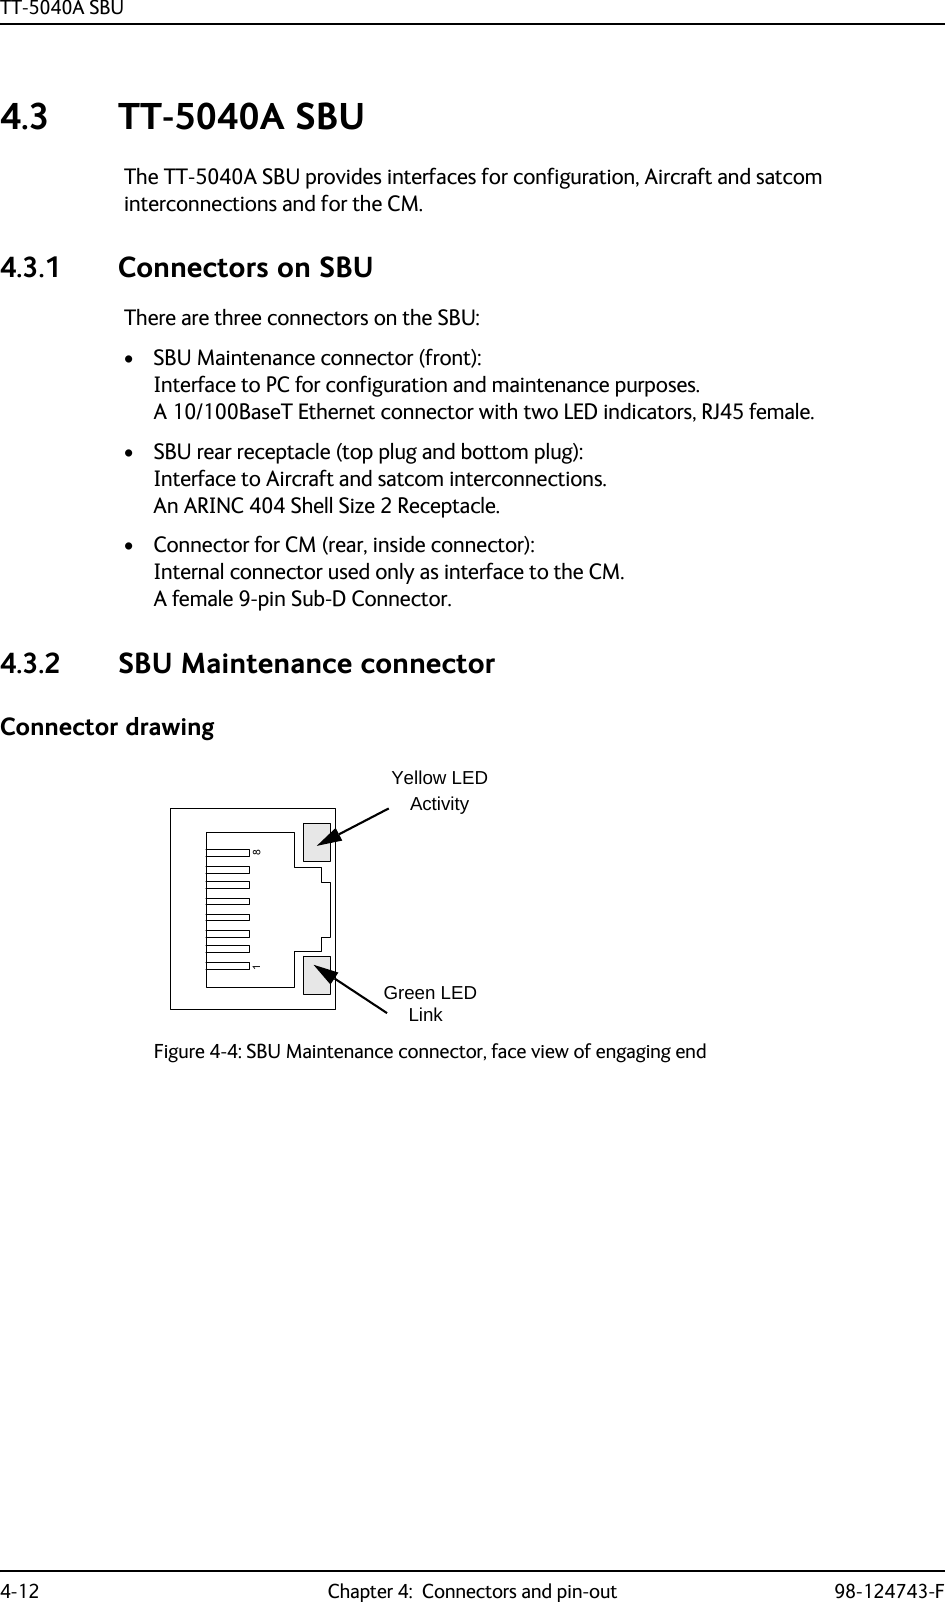 TT-5040A SBU4-12 Chapter 4:  Connectors and pin-out 98-124743-F4.3 TT-5040A SBUThe TT-5040A SBU provides interfaces for configuration, Aircraft and satcom interconnections and for the CM.4.3.1 Connectors on SBUThere are three connectors on the SBU:• SBU Maintenance connector (front):Interface to PC for configuration and maintenance purposes. A 10/100BaseT Ethernet connector with two LED indicators, RJ45 female.• SBU rear receptacle (top plug and bottom plug): Interface to Aircraft and satcom interconnections. An ARINC 404 Shell Size 2 Receptacle.• Connector for CM (rear, inside connector): Internal connector used only as interface to the CM.A female 9-pin Sub-D Connector.4.3.2 SBU Maintenance connectorConnector drawingFigure 4-4: SBU Maintenance connector, face view of engaging endYellow LEDActivityGreen LEDLink